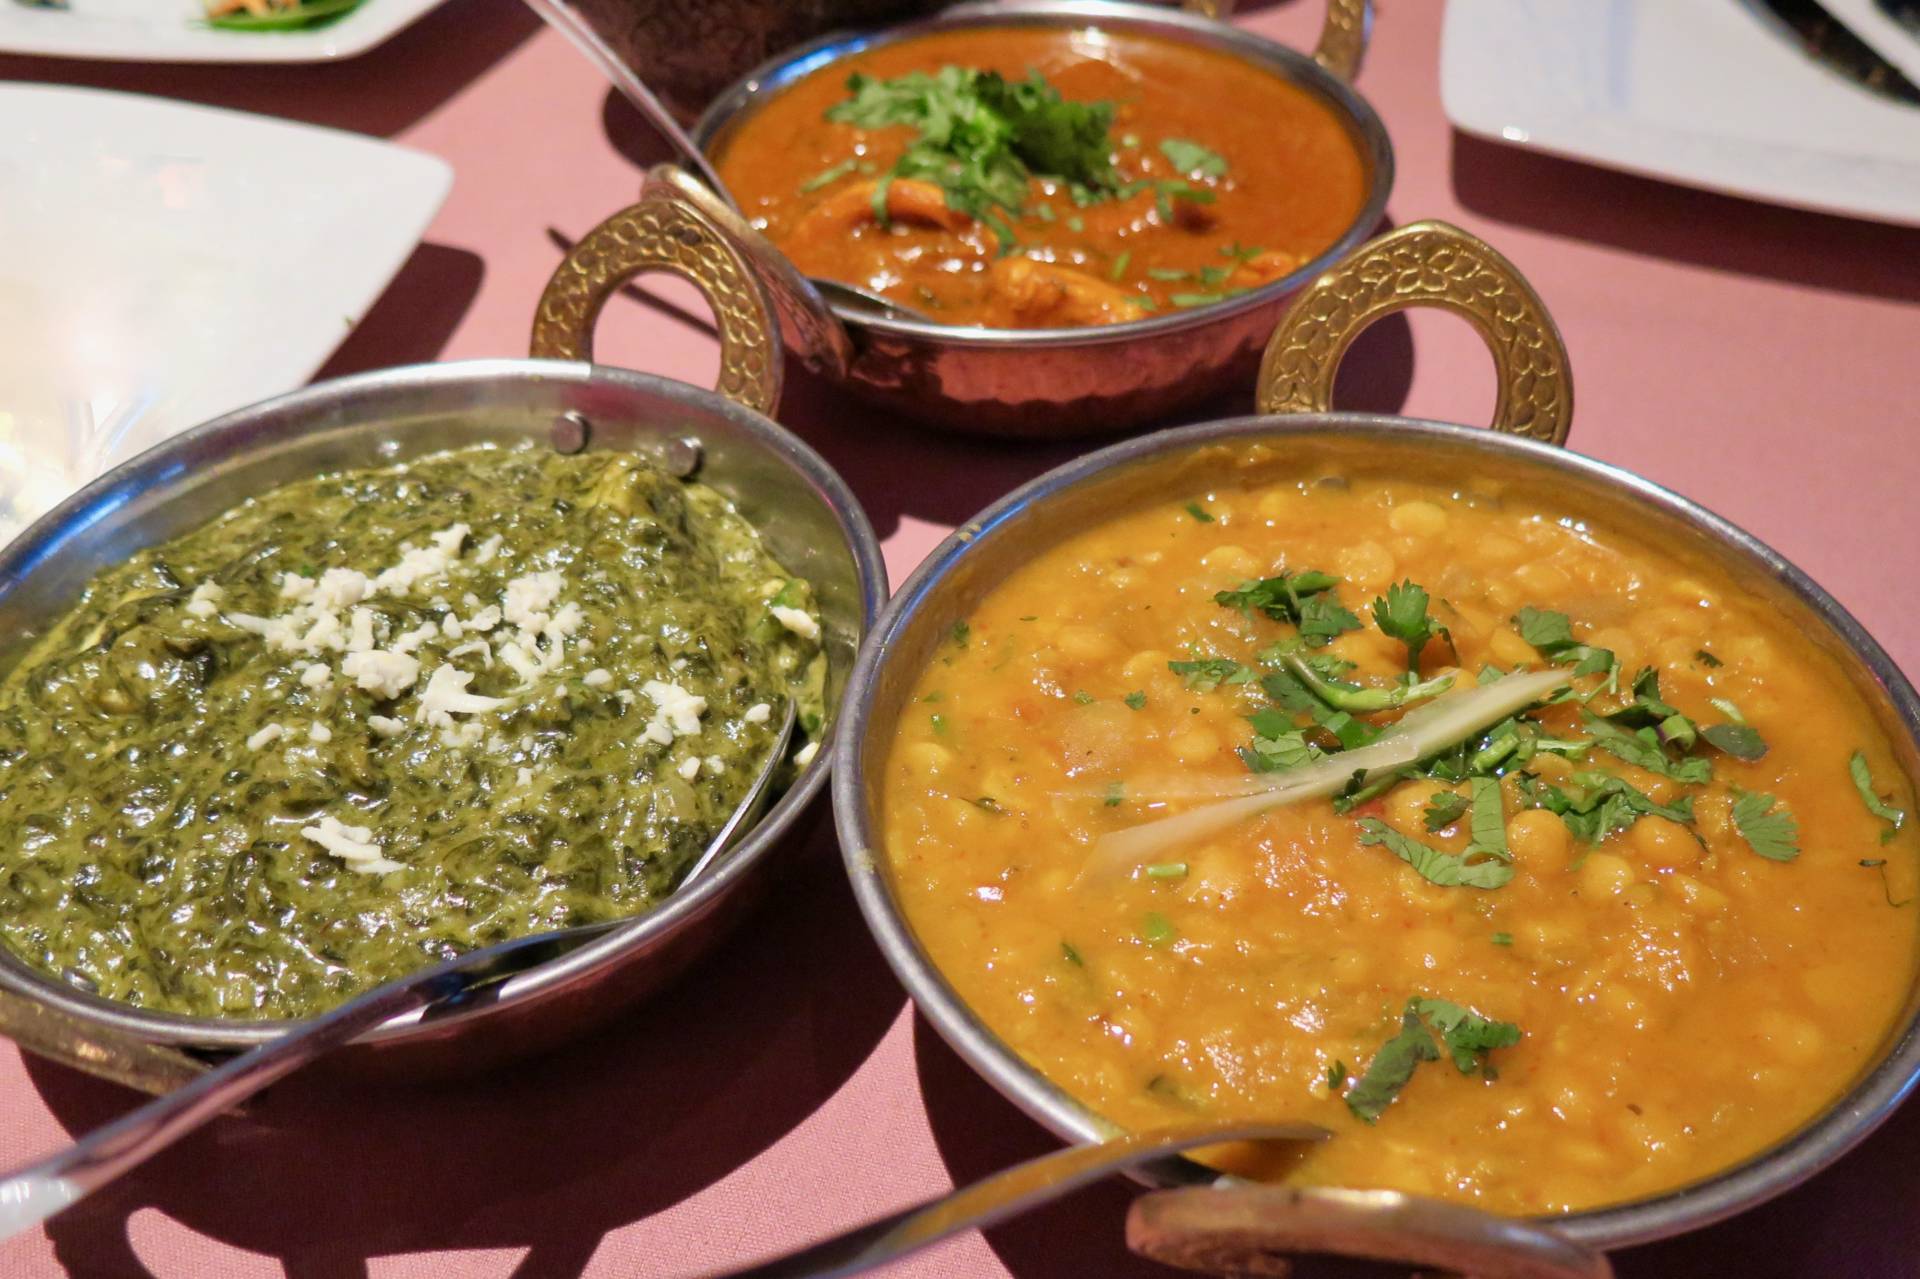 The creamy organic paneer makes this saag stand out.